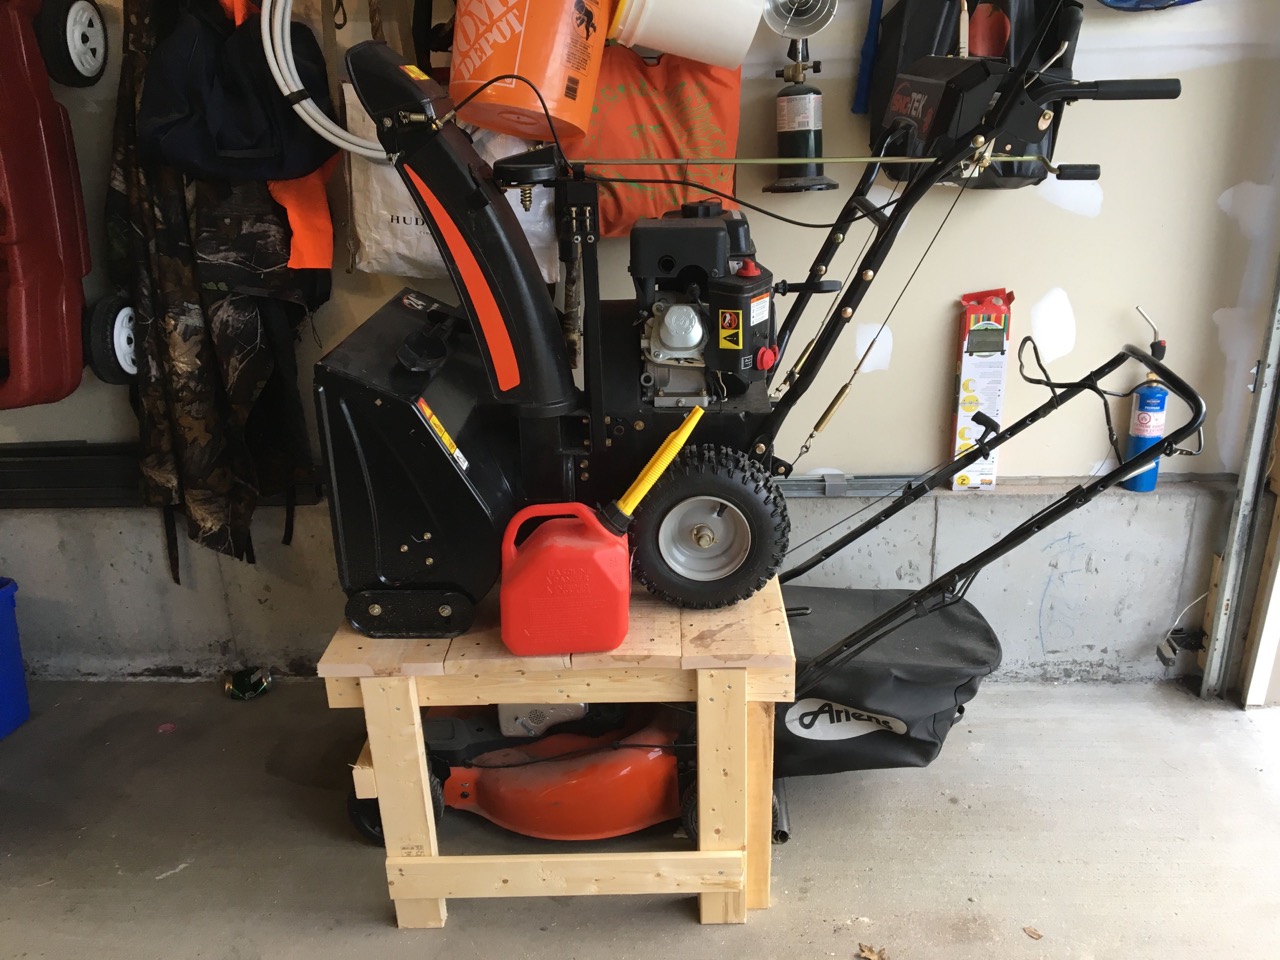 How To Store Lawn Mower And Snow Blower In Garage